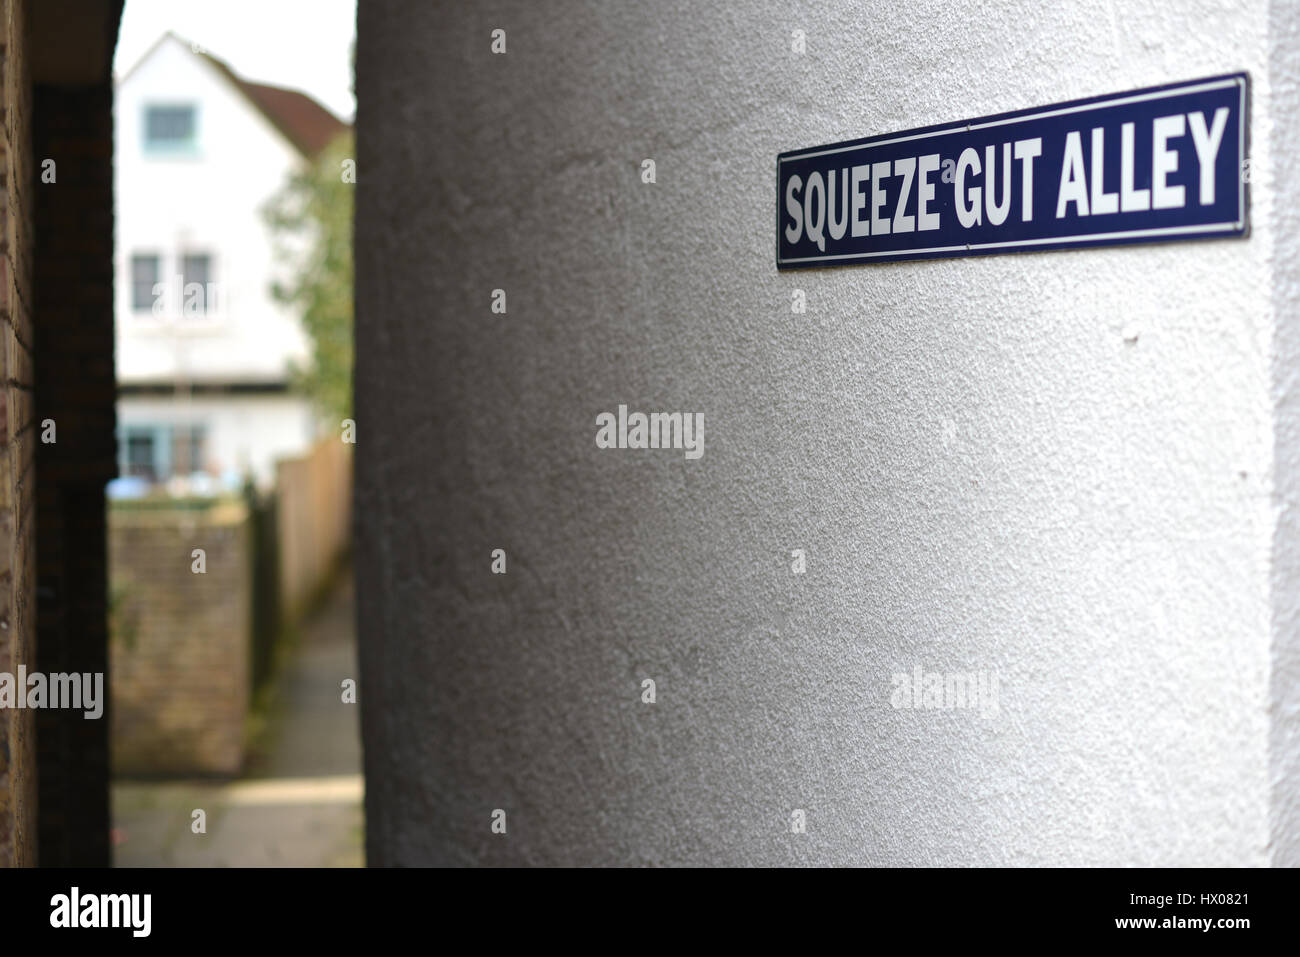 Squeeze Gut Alley, Whitstable, Kent Stock Photo